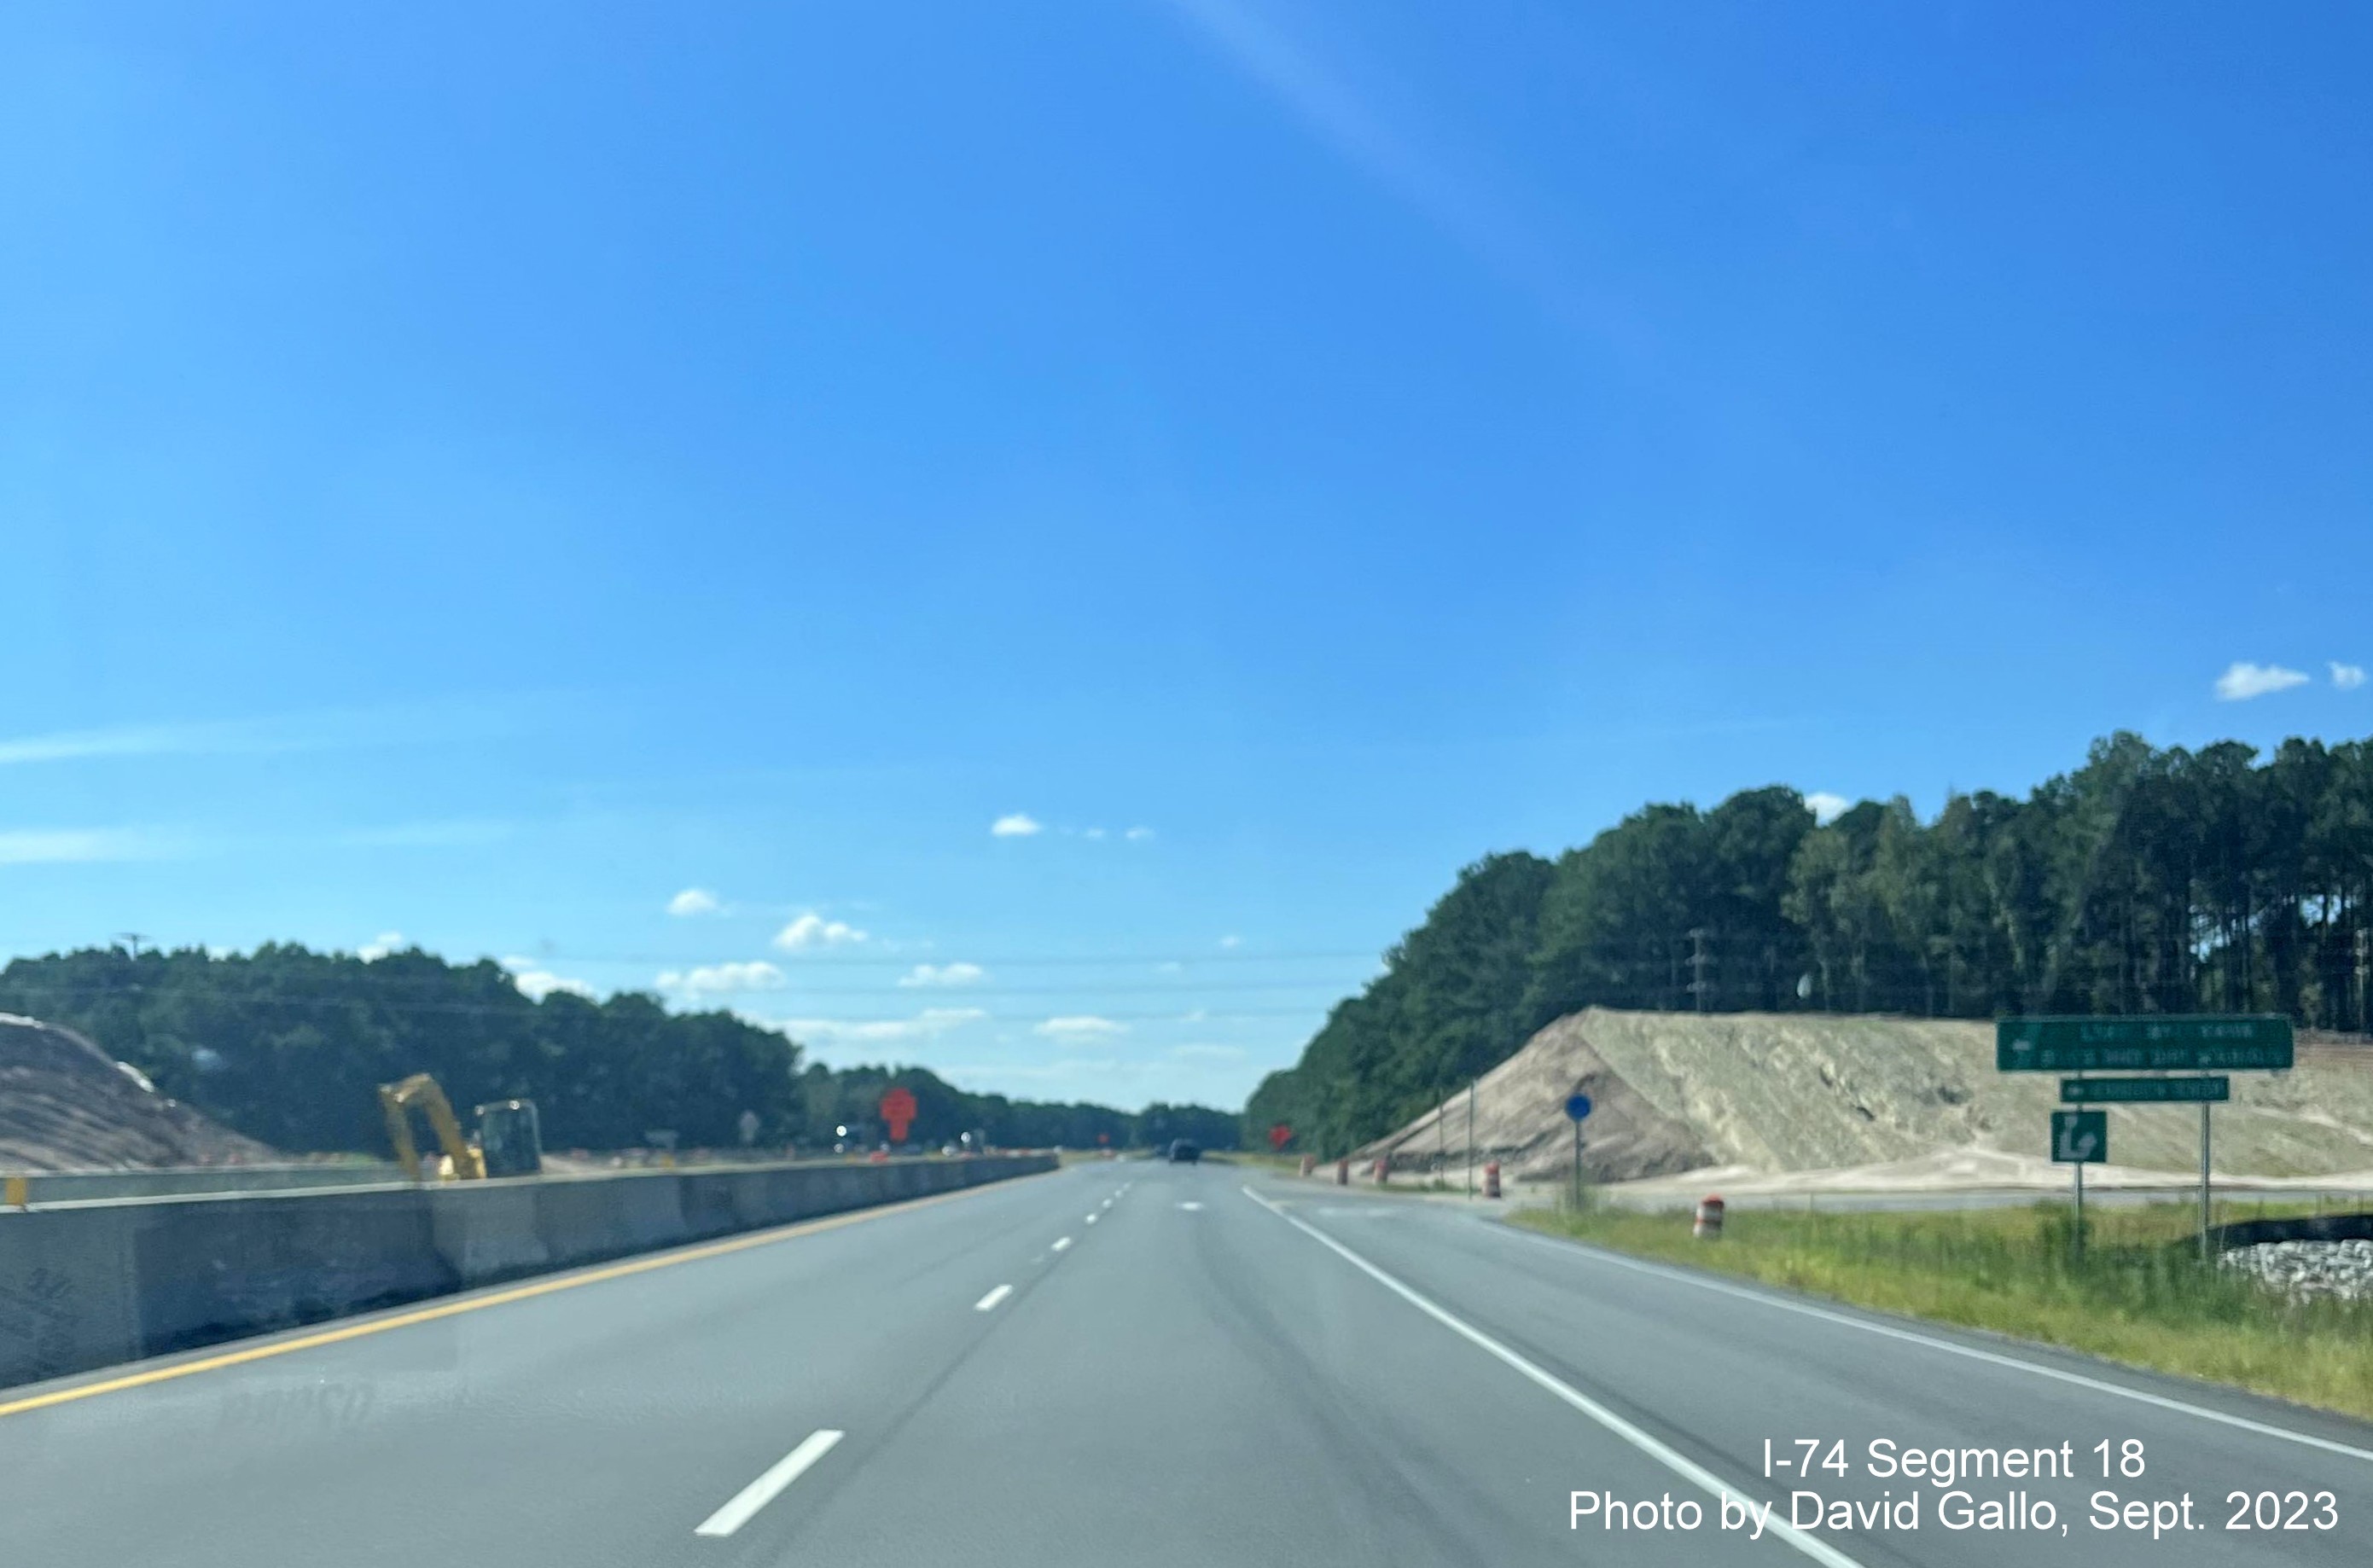 Image of interchange construction approaching current Chauncey Town Road intersection on US 74/76 (Future I-74) West in Lake Waccamaw, David Gallo, September 2023